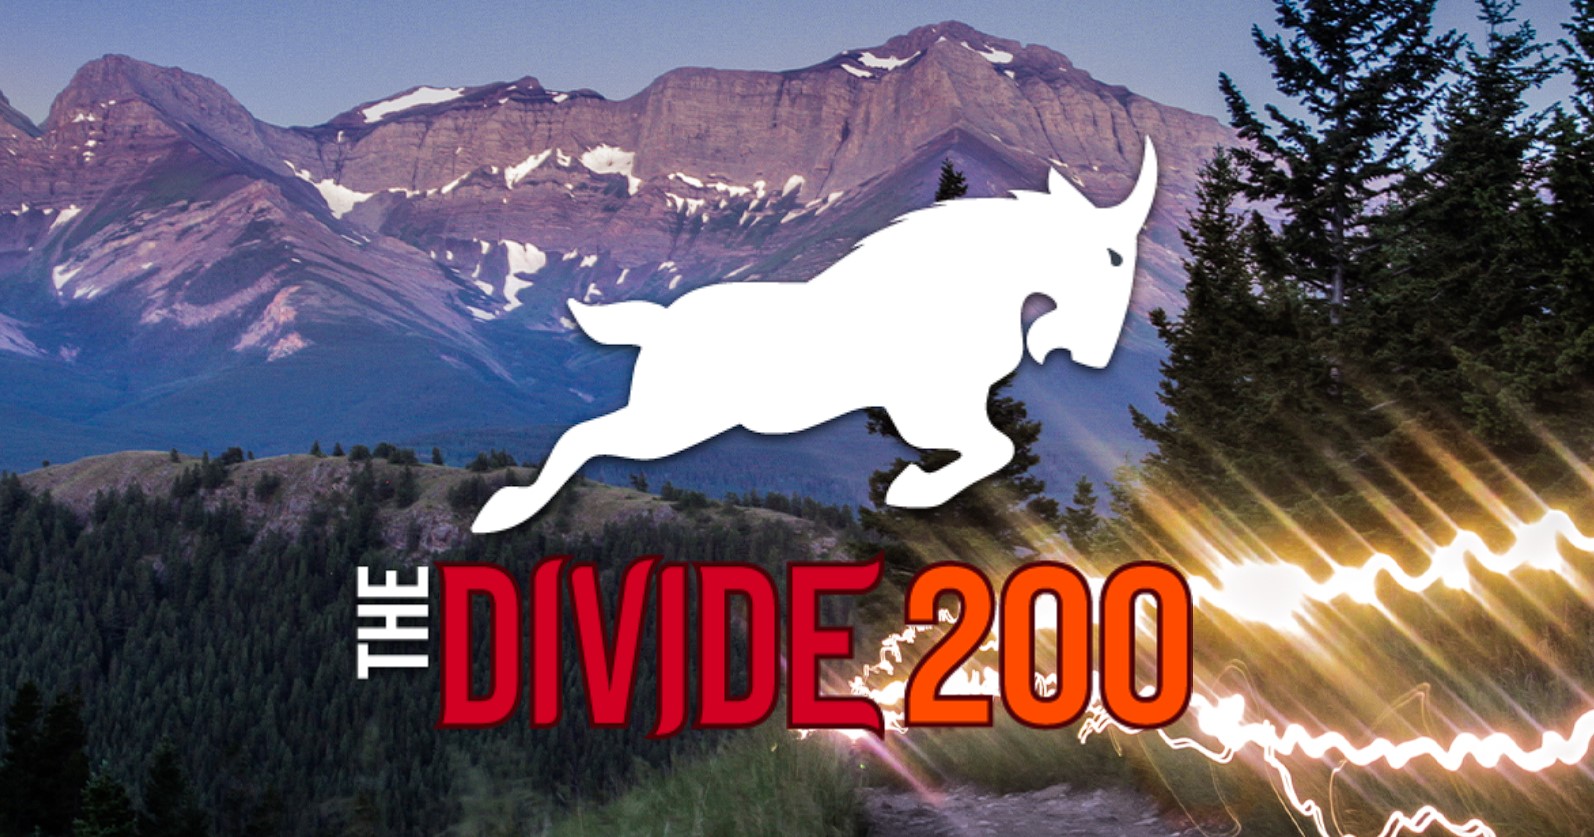 The Divide 200